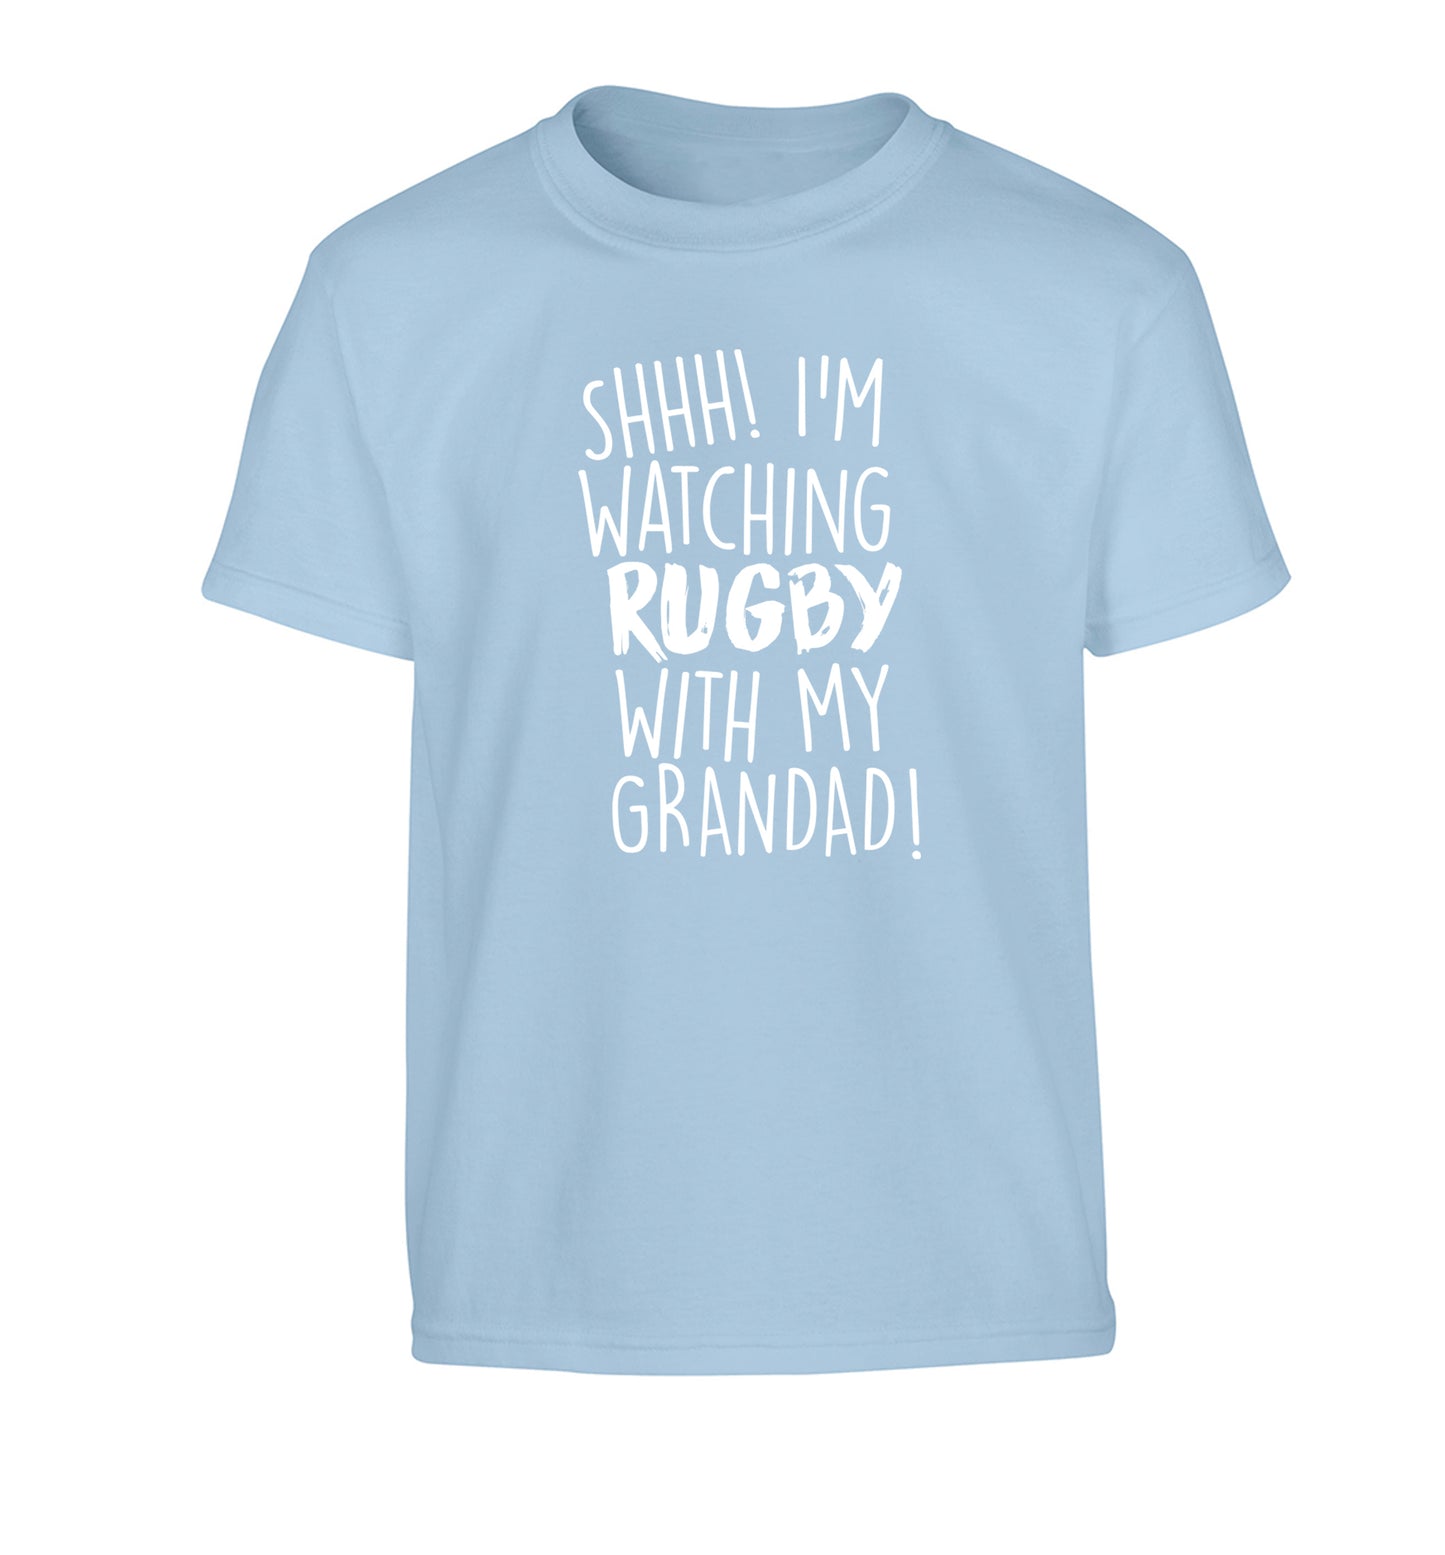 Shh I'm watching rugby with my grandad Children's light blue Tshirt 12-13 Years